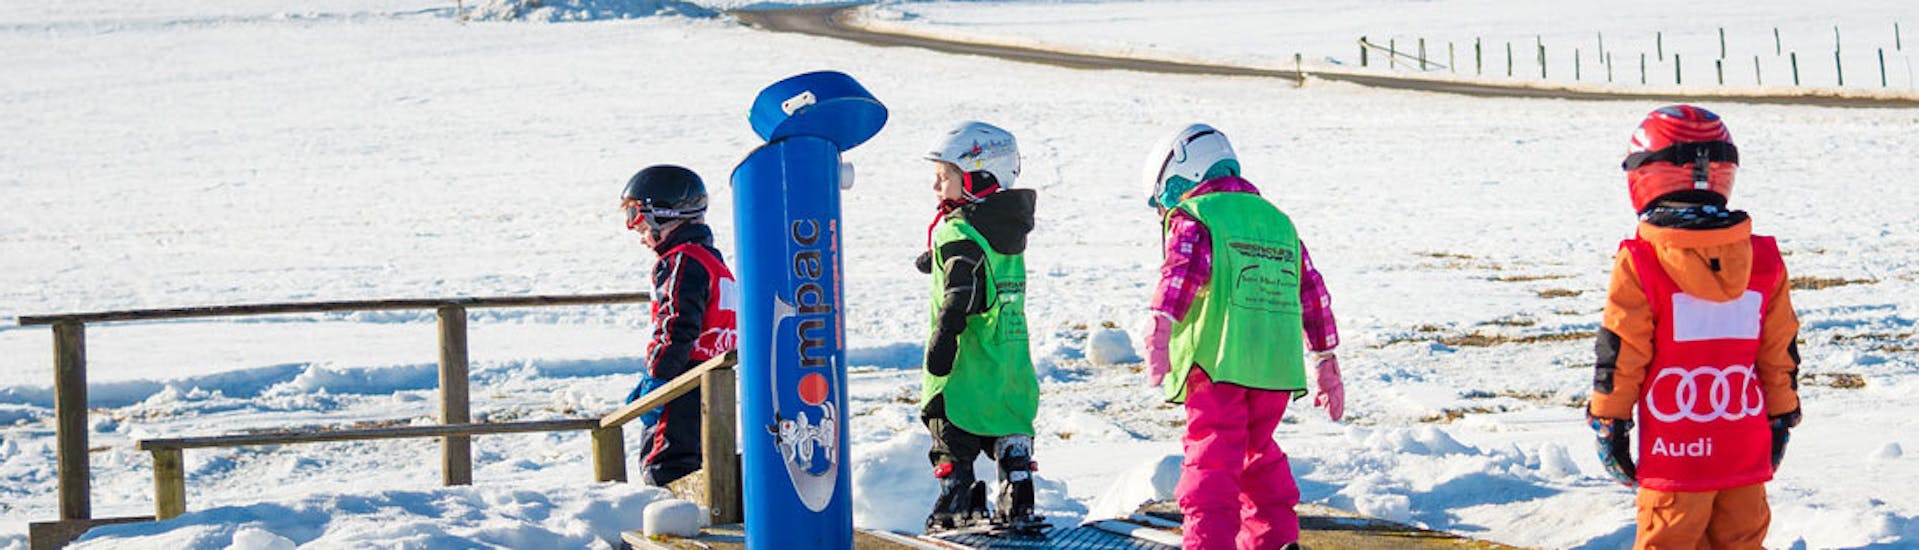 Kids on magic carpet during the Kids Ski Lessons (4-10 y.) for experienced skiers with Ski School Snow & Bike Factory Willingen.